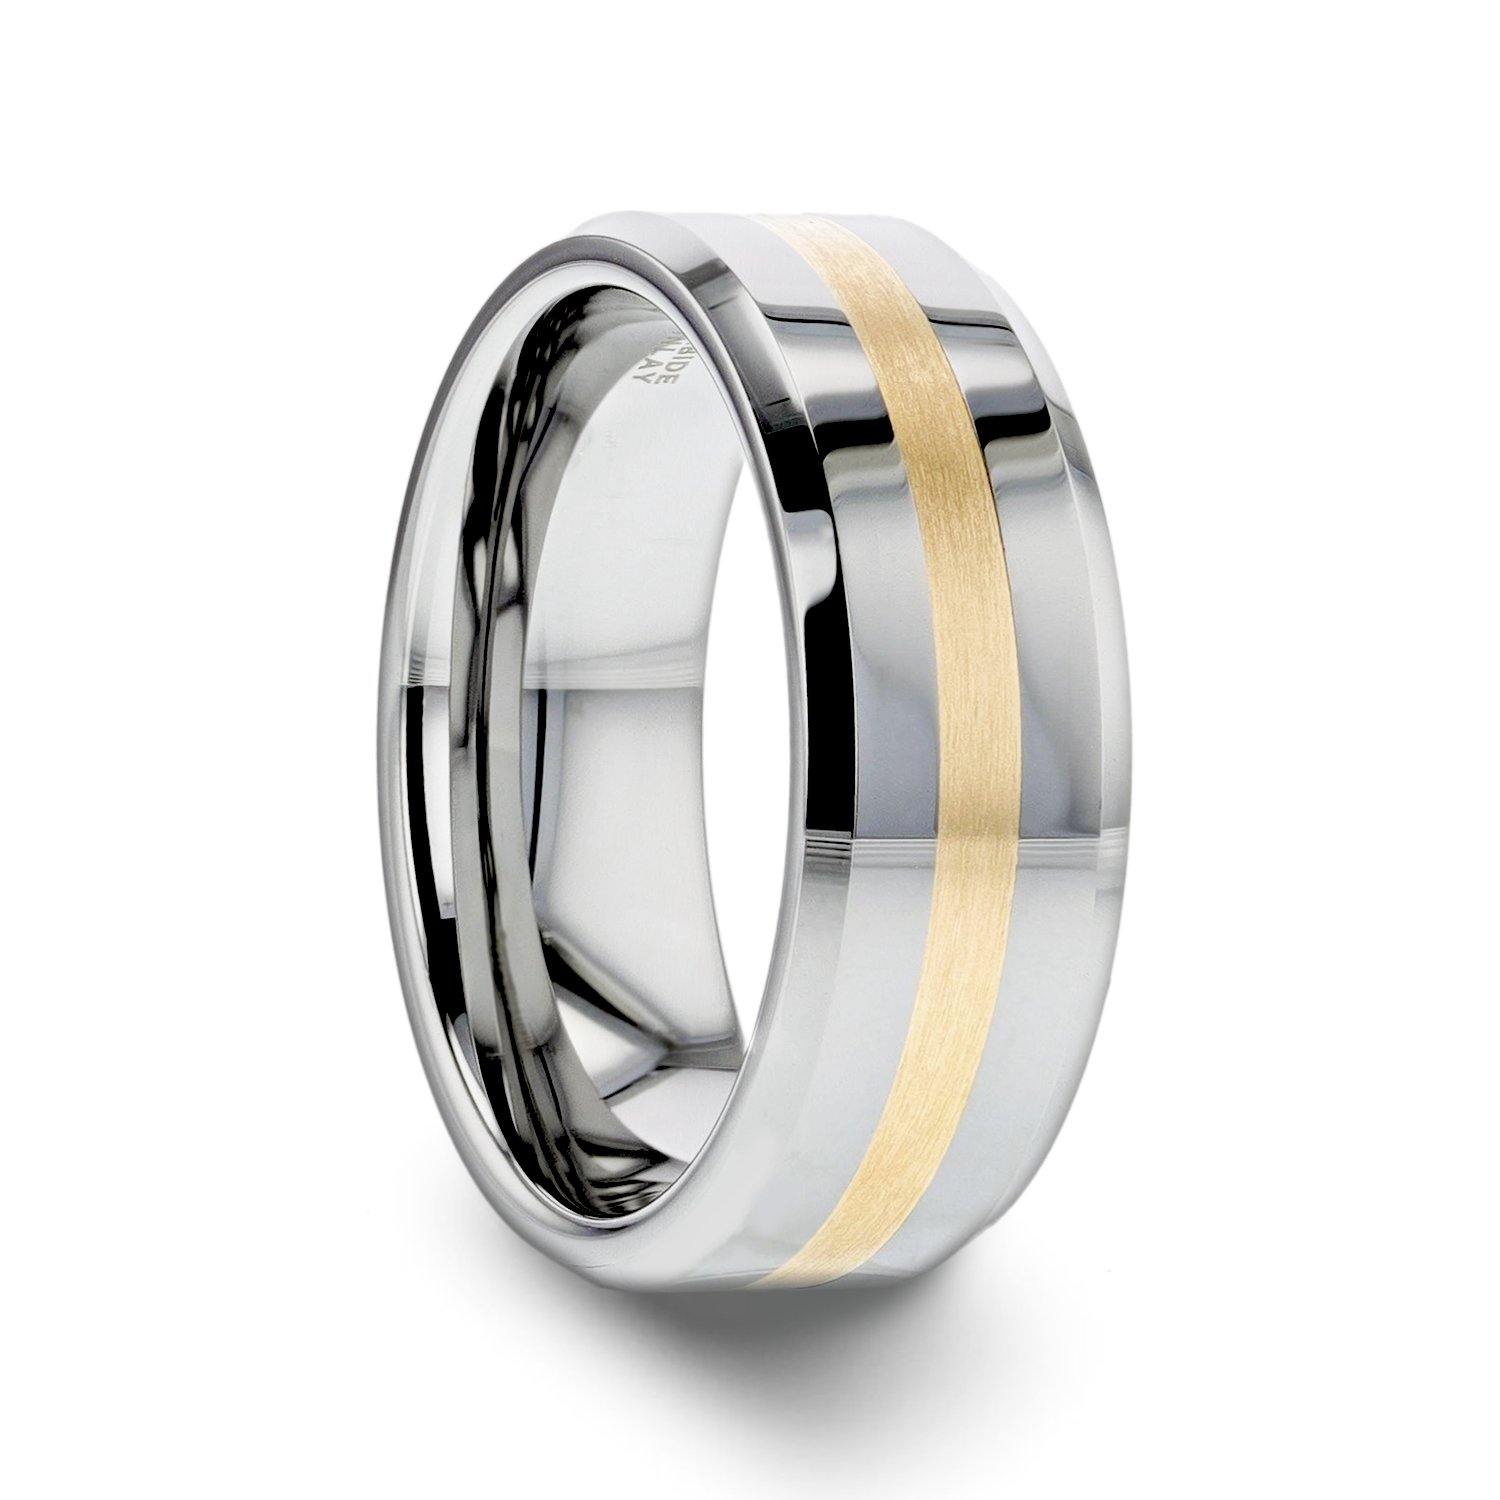 LEGIONAIRE - Gold Inlaid Beveled Tungsten Ring - 6mm & 8mm - The Rutile Ltd